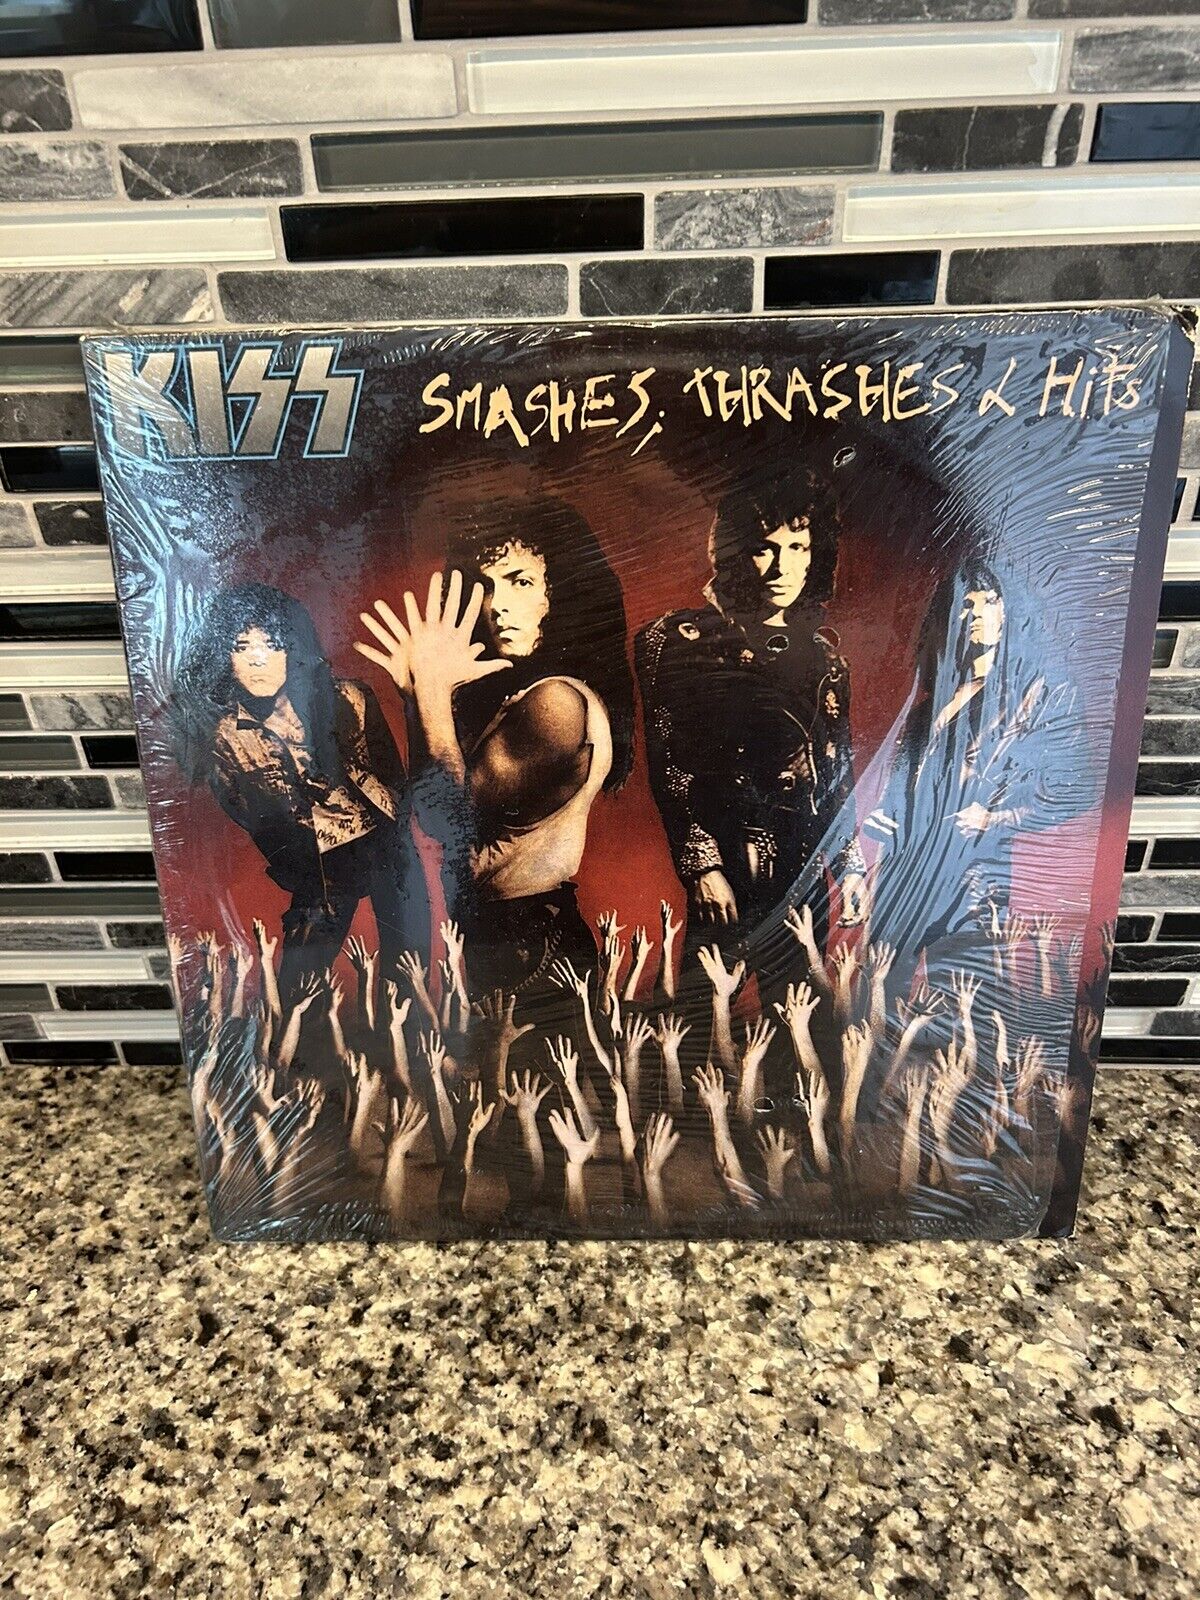 KISS-Smashes, Thrashes, and Hits-Vinyl LP 1988 Polygram Records WITH Shrink